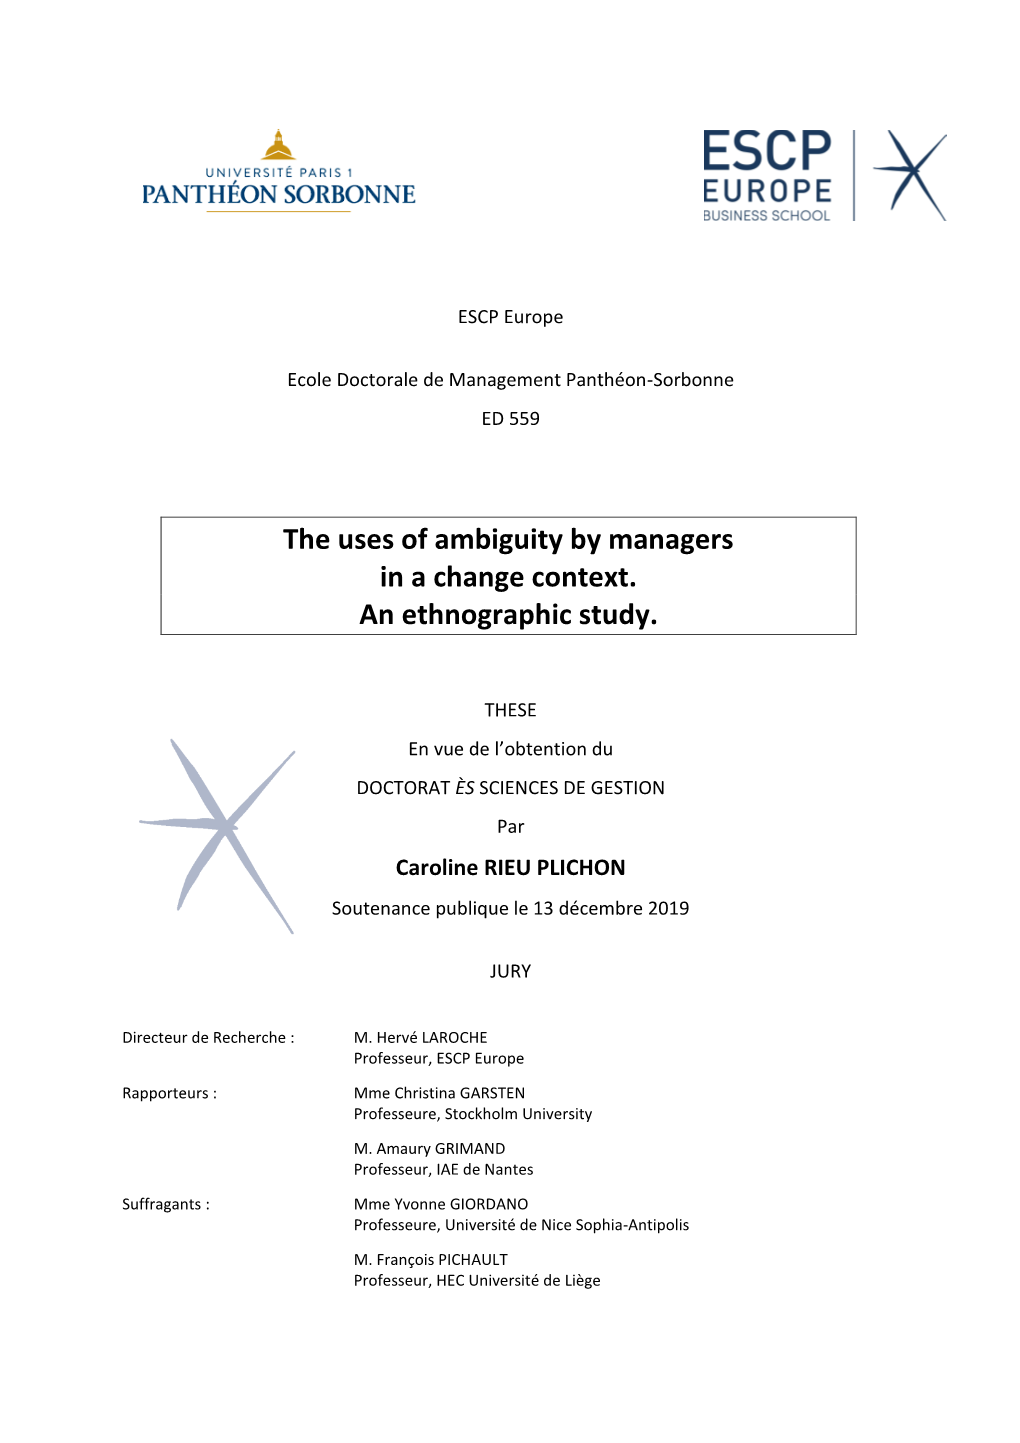 The Uses of Ambiguity by Managers in a Change Context. an Ethnographic Study